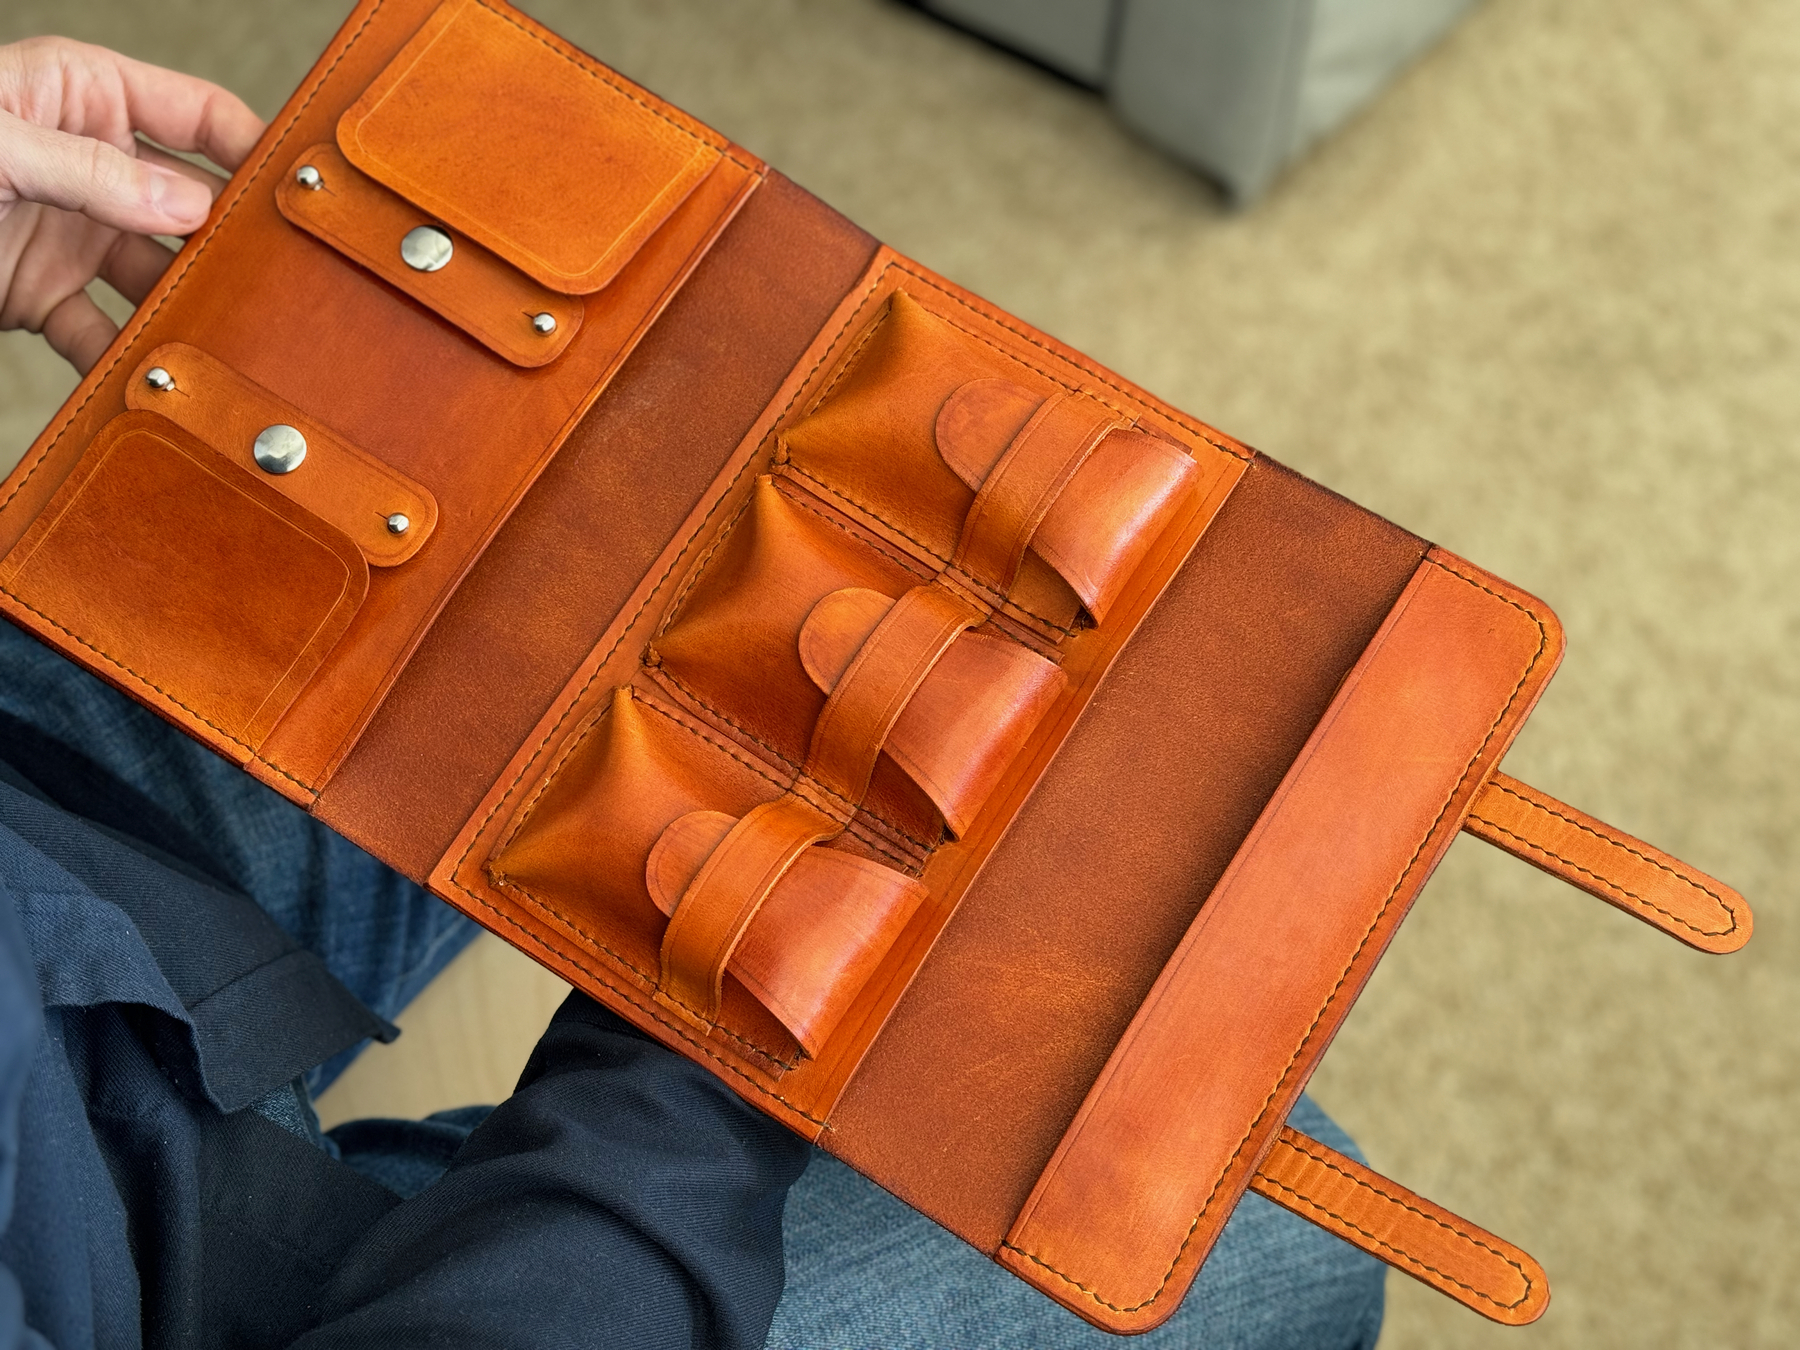 custom leather cigar case shown open with two primary sections. one on the very left for holding cigar tubes and similar sized items, and then a section in the center with three pockets (one each for lighter, cutter, etc).